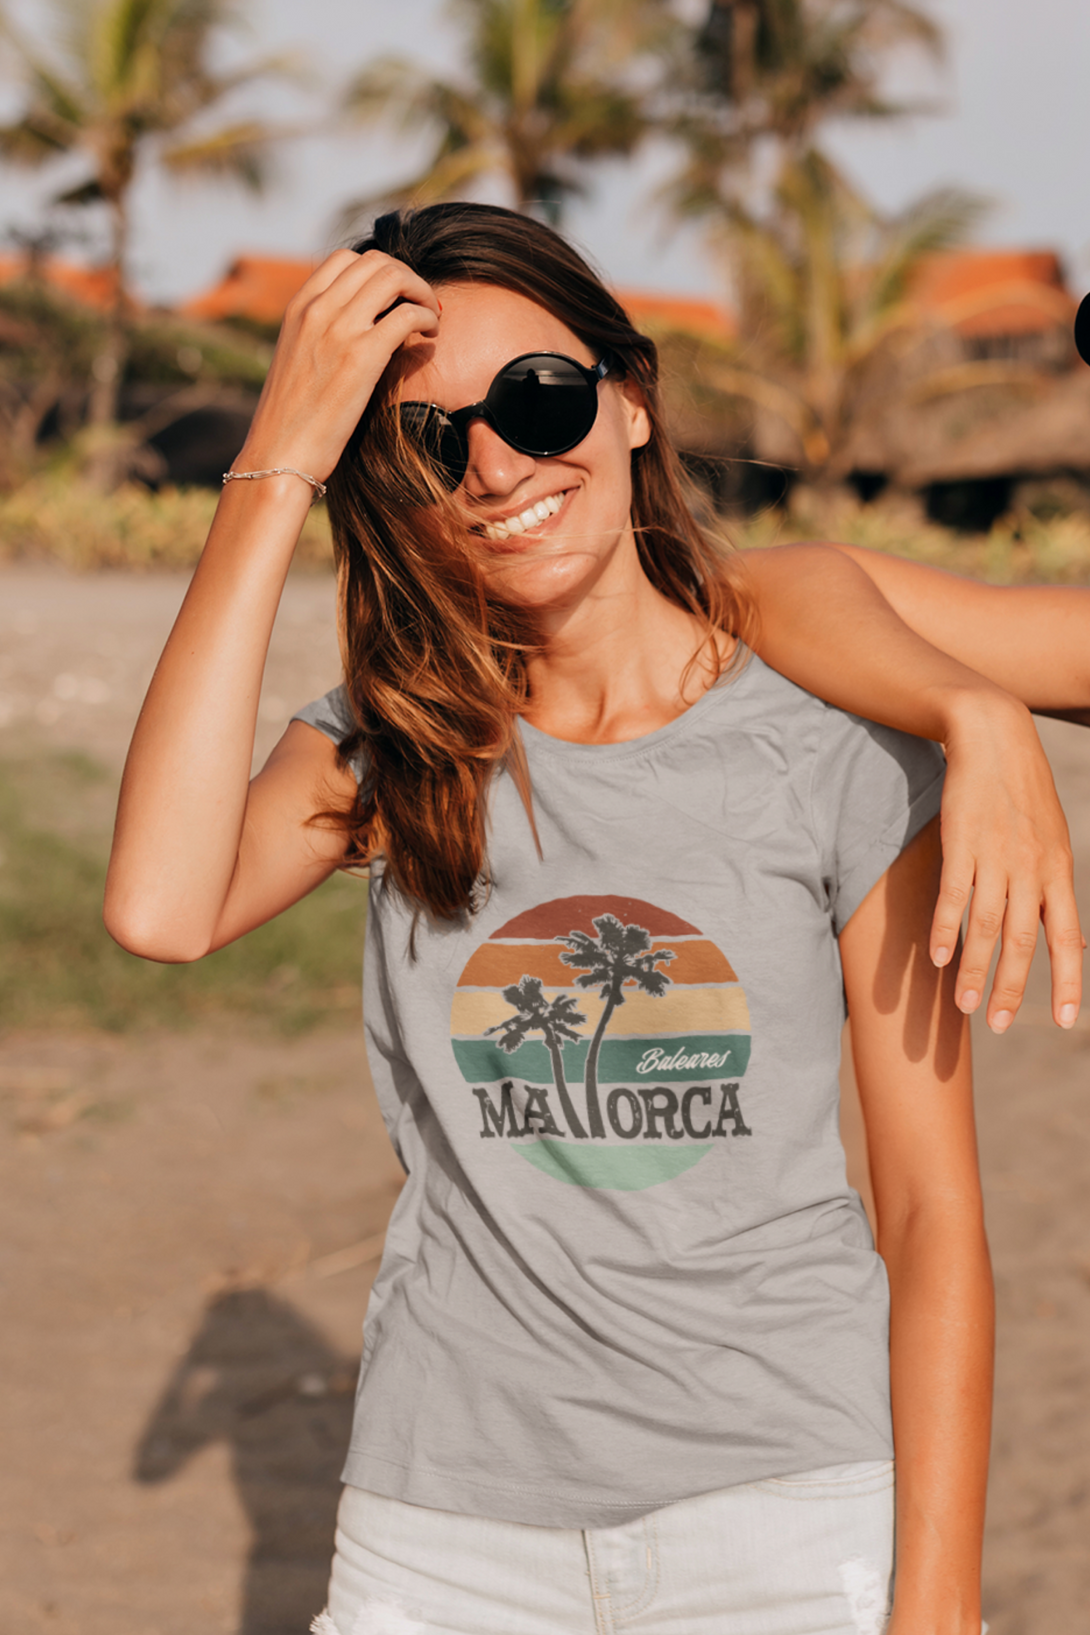 Mallorca And Palm Printed Scoop Neck T-Shirt For Women - WowWaves - 6